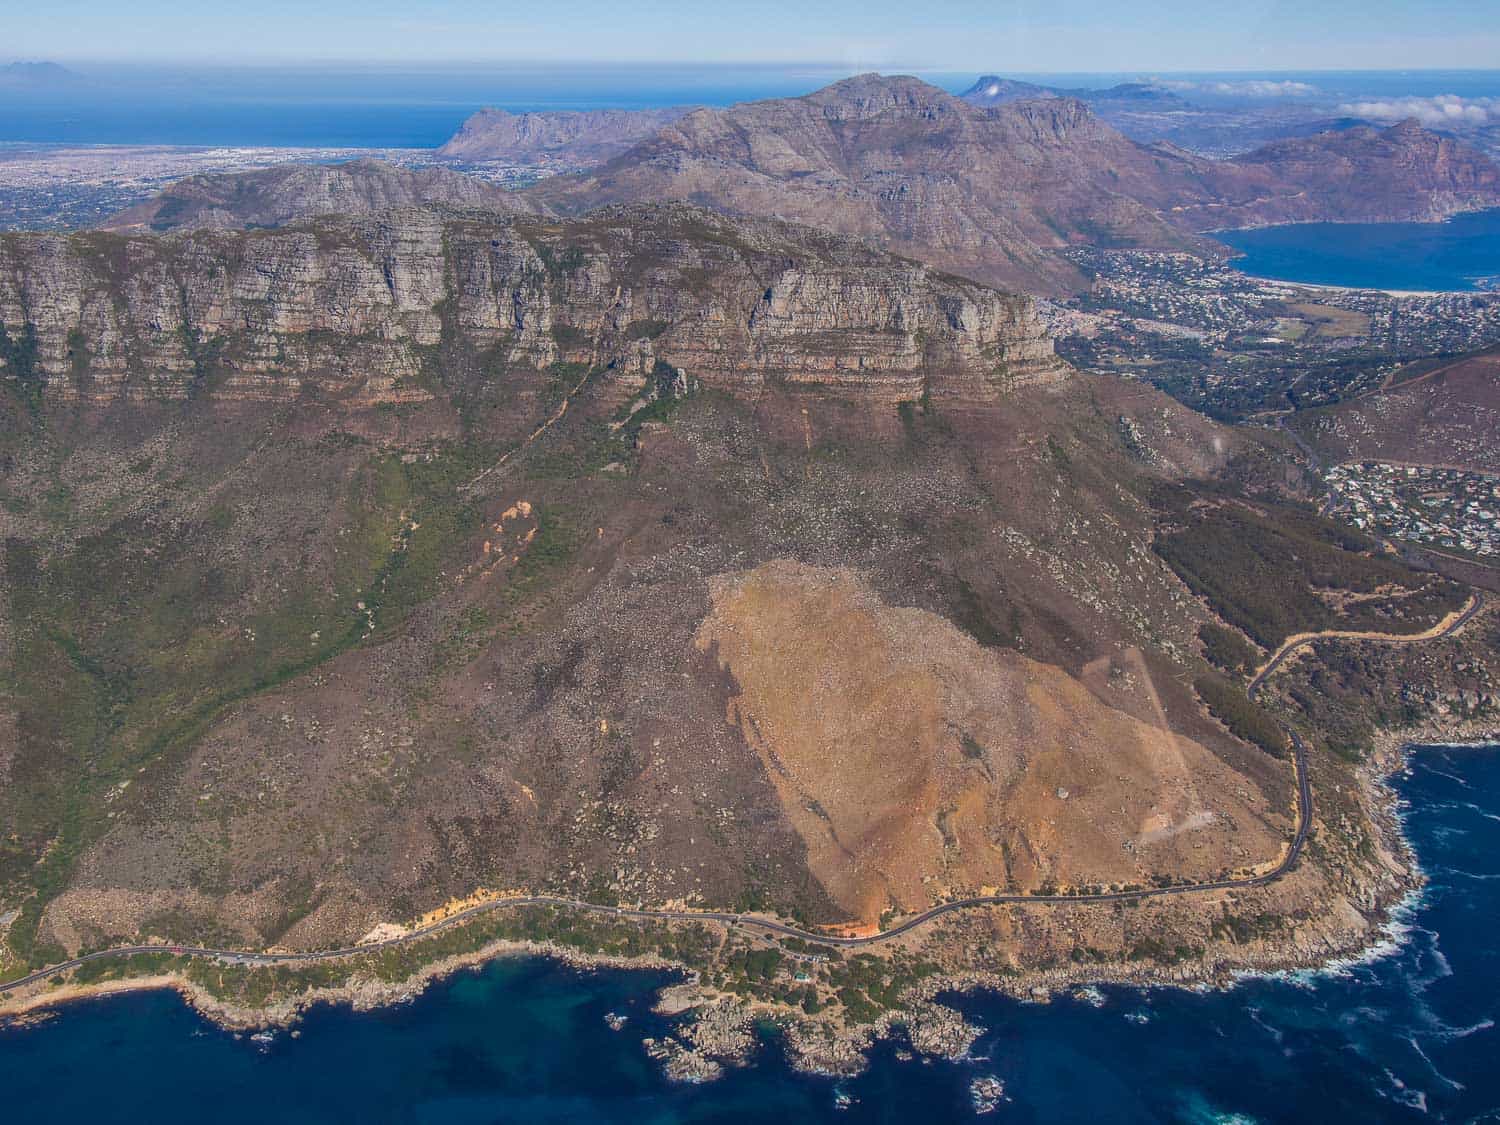 Cape Town Helicopters review: Victoria Rd